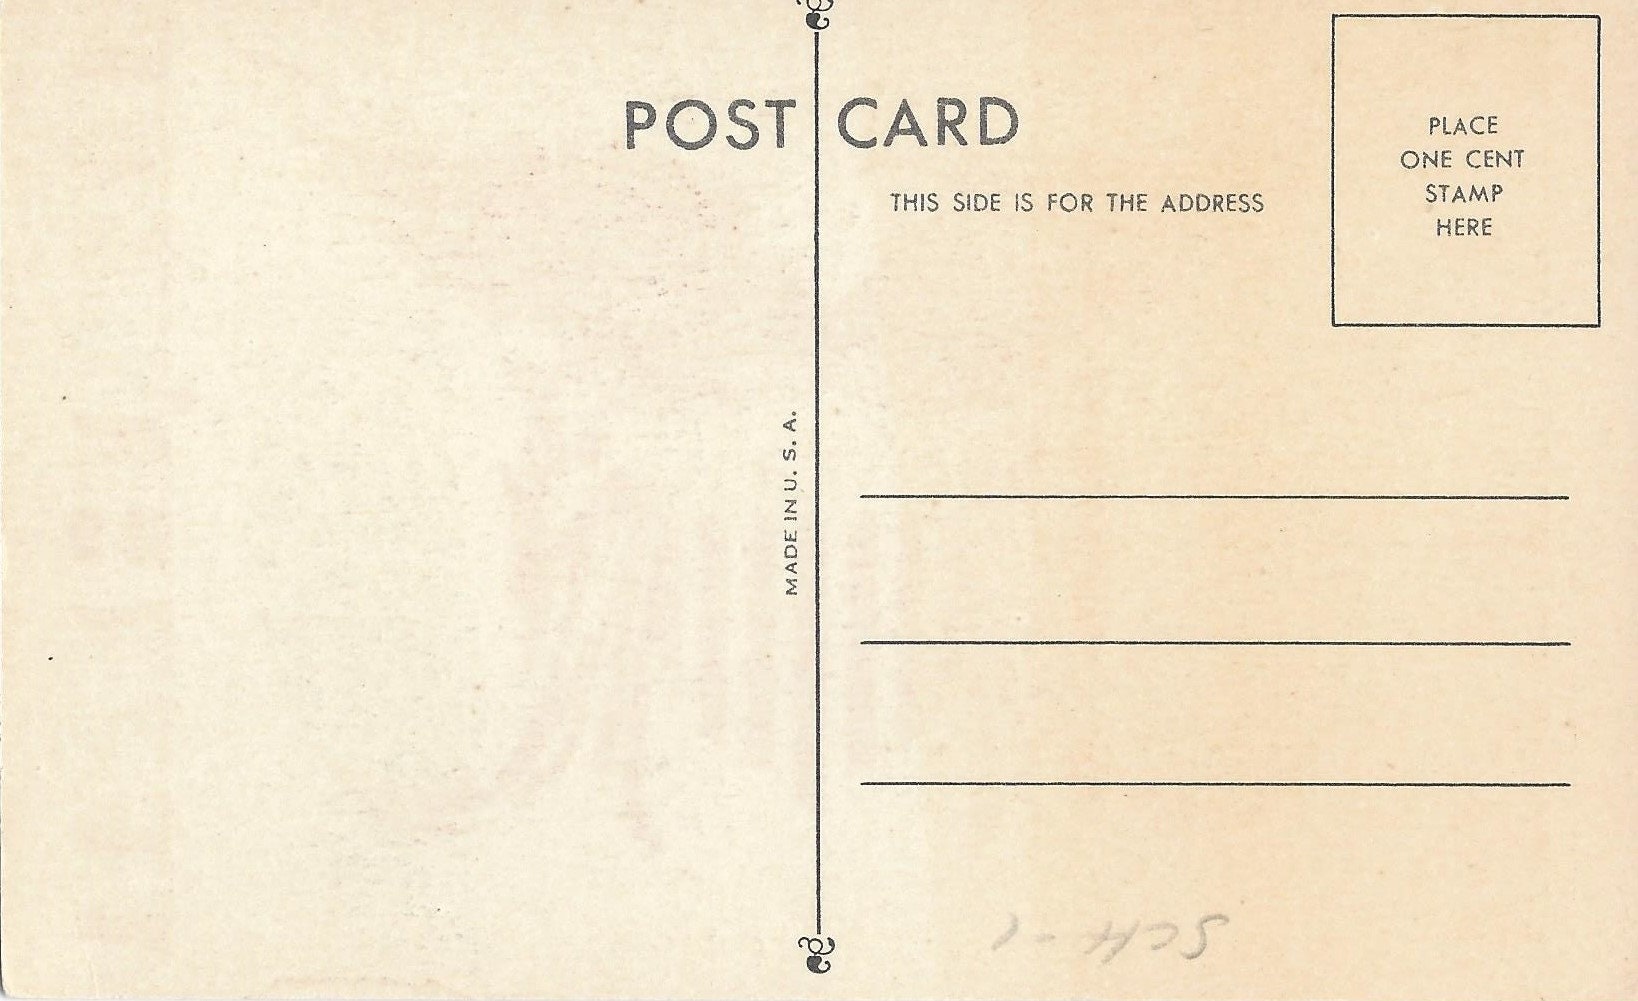 Vintage Postcard Reverse Template. Graphic by norsob · Creative